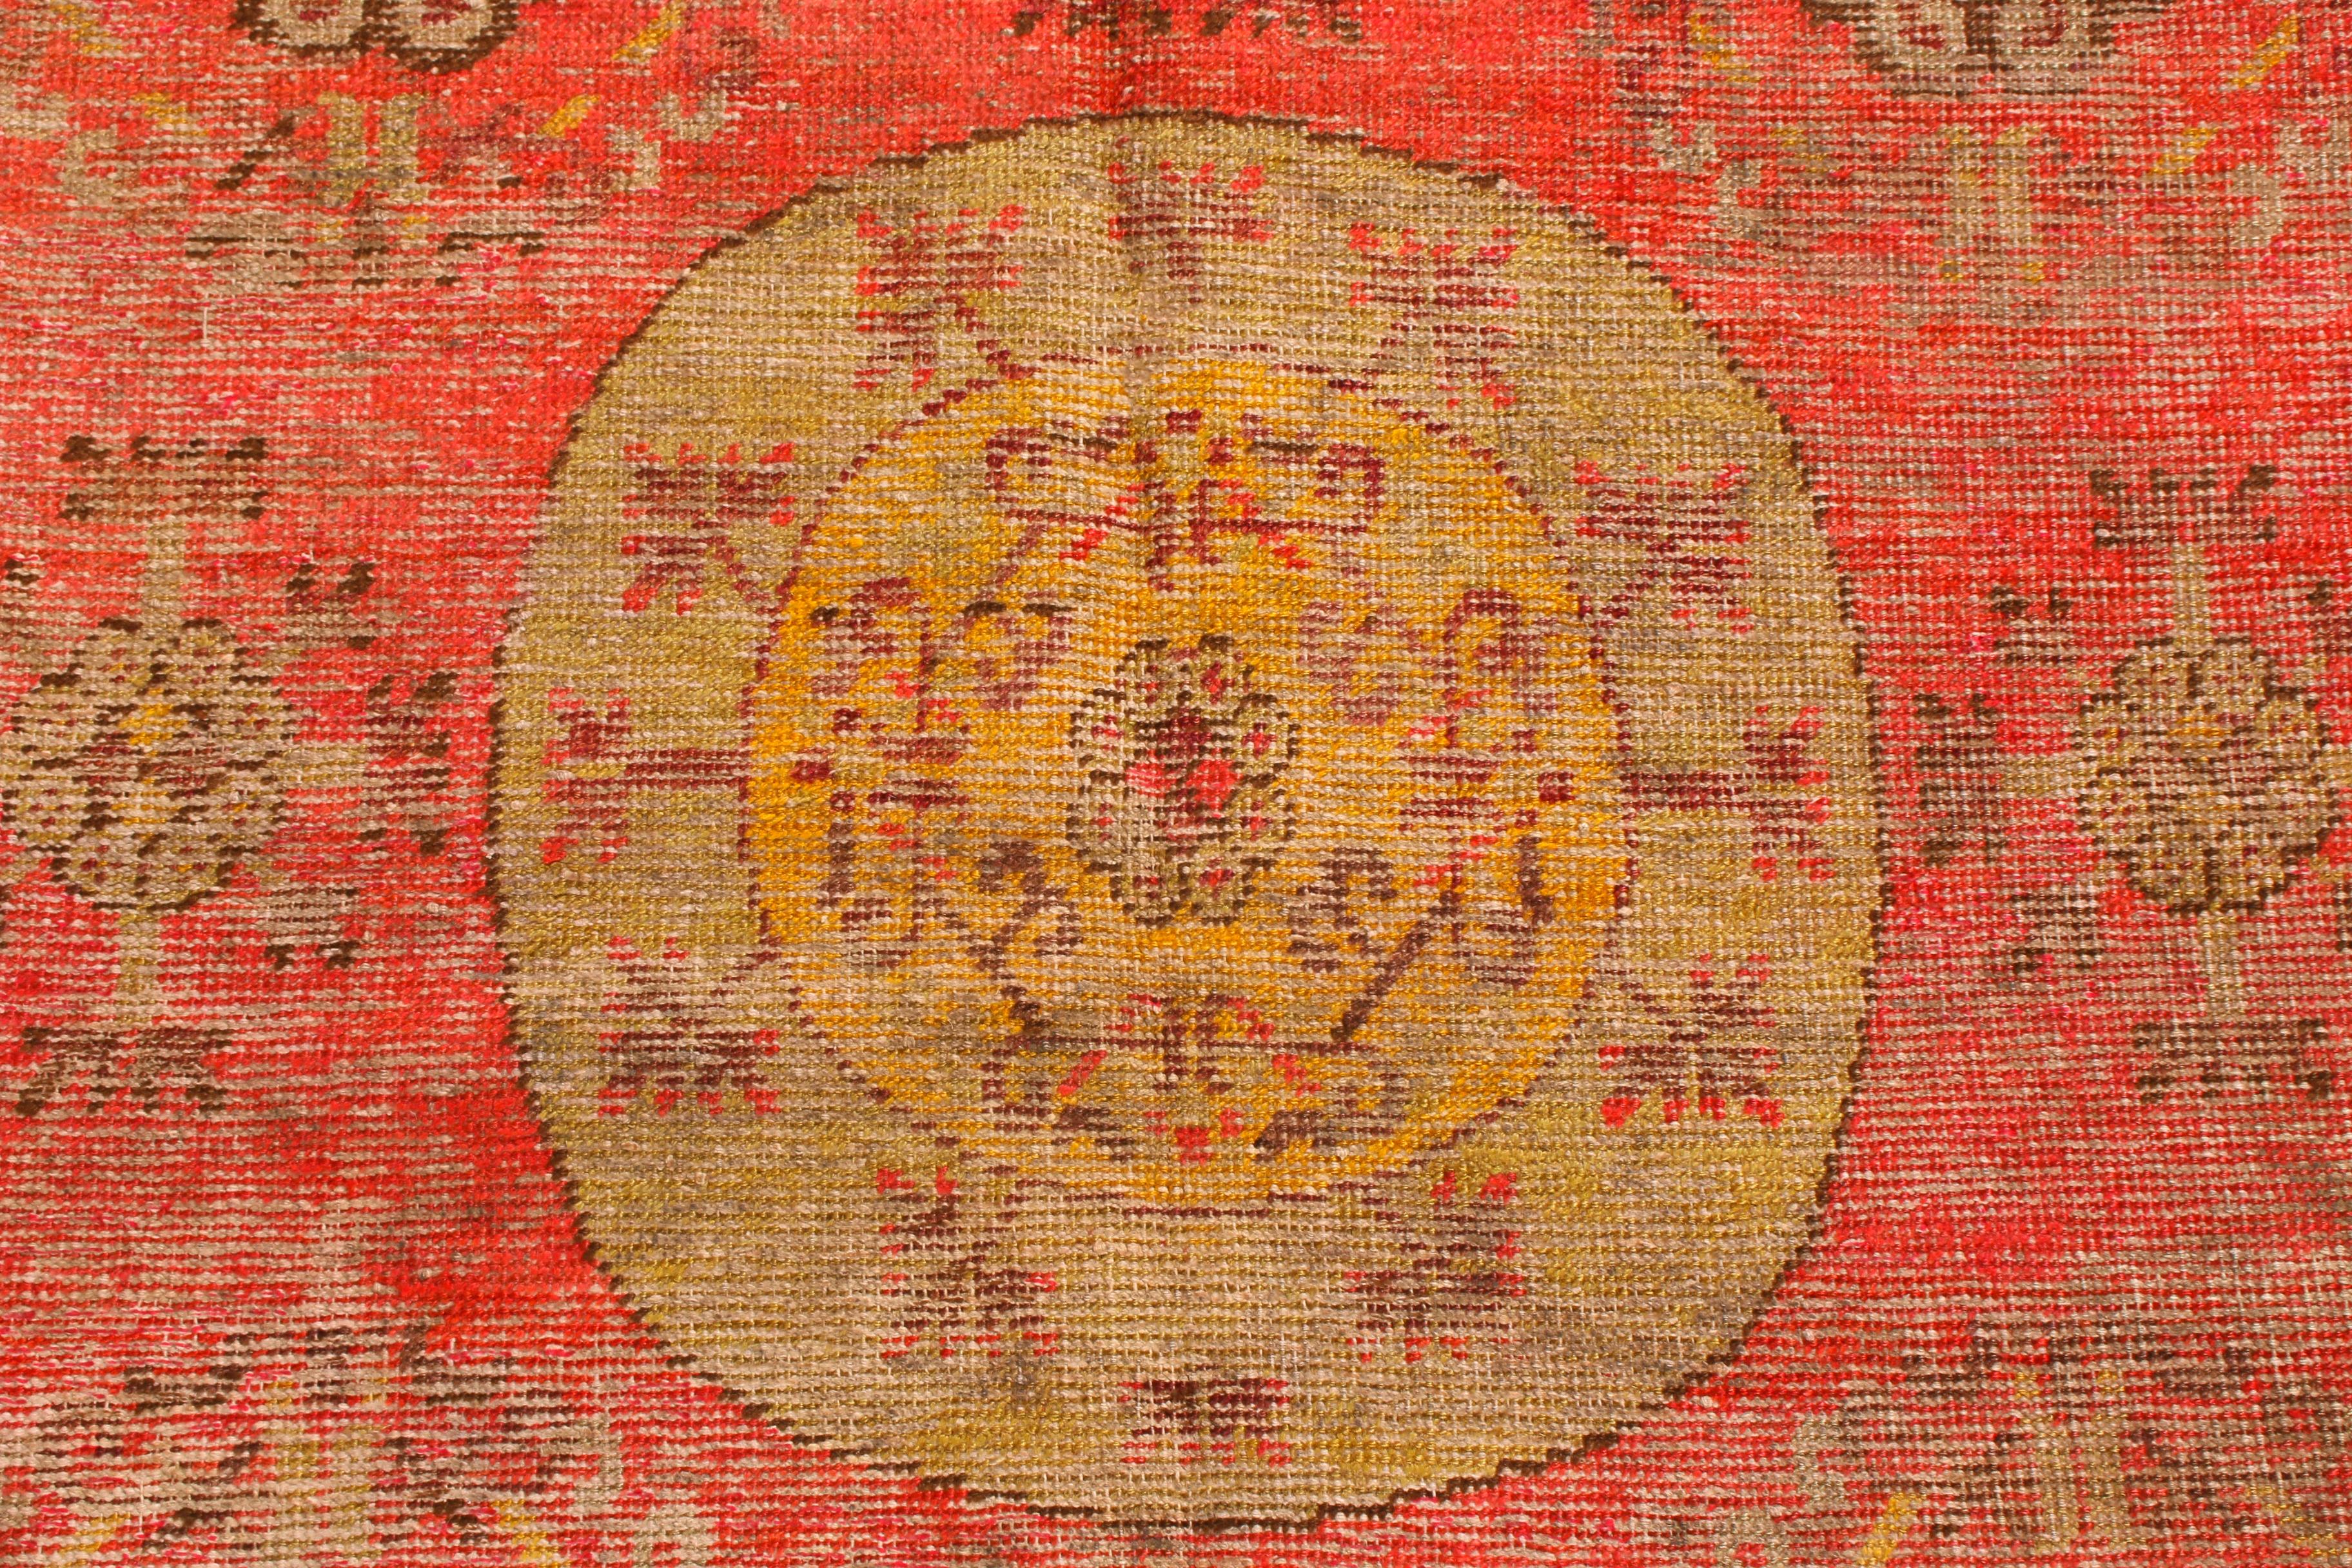 Originating from East Turkestan in the 1920s, this antique traditional Khotan rug from Rug & Kilim has a distinct medallion-style field design surrounded by key eastern symbolism. As Khotan was a Buddhist kingdom, this rug employs symbolic